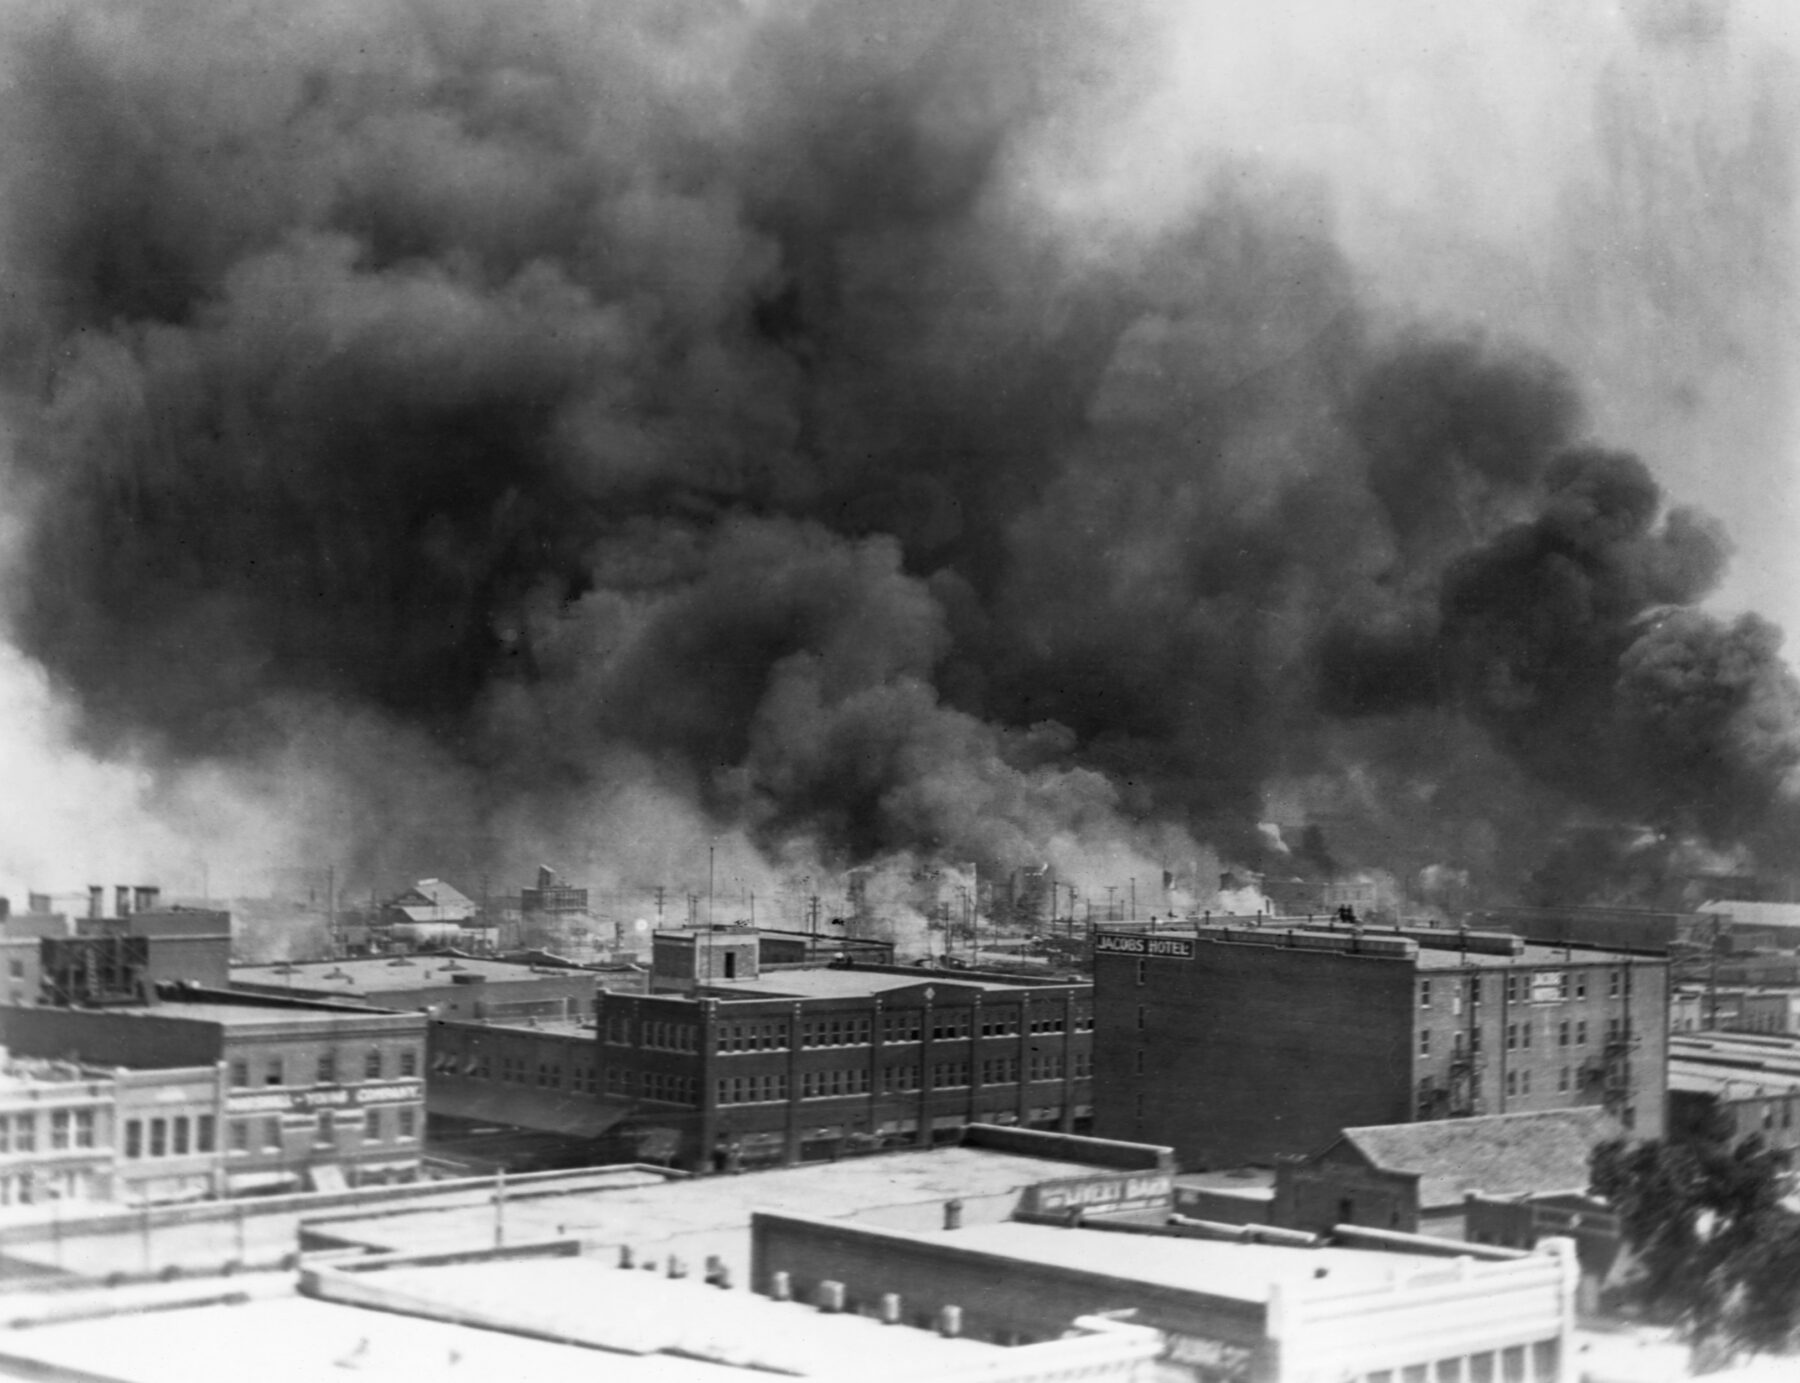 Black smoke billows from fires during the Tulsa Race Massacre of 1921, in the Greenwood District, Tulsa, Oklahoma, US, June 1921. (Photo by © CORBIS/Corbis via Getty Images)